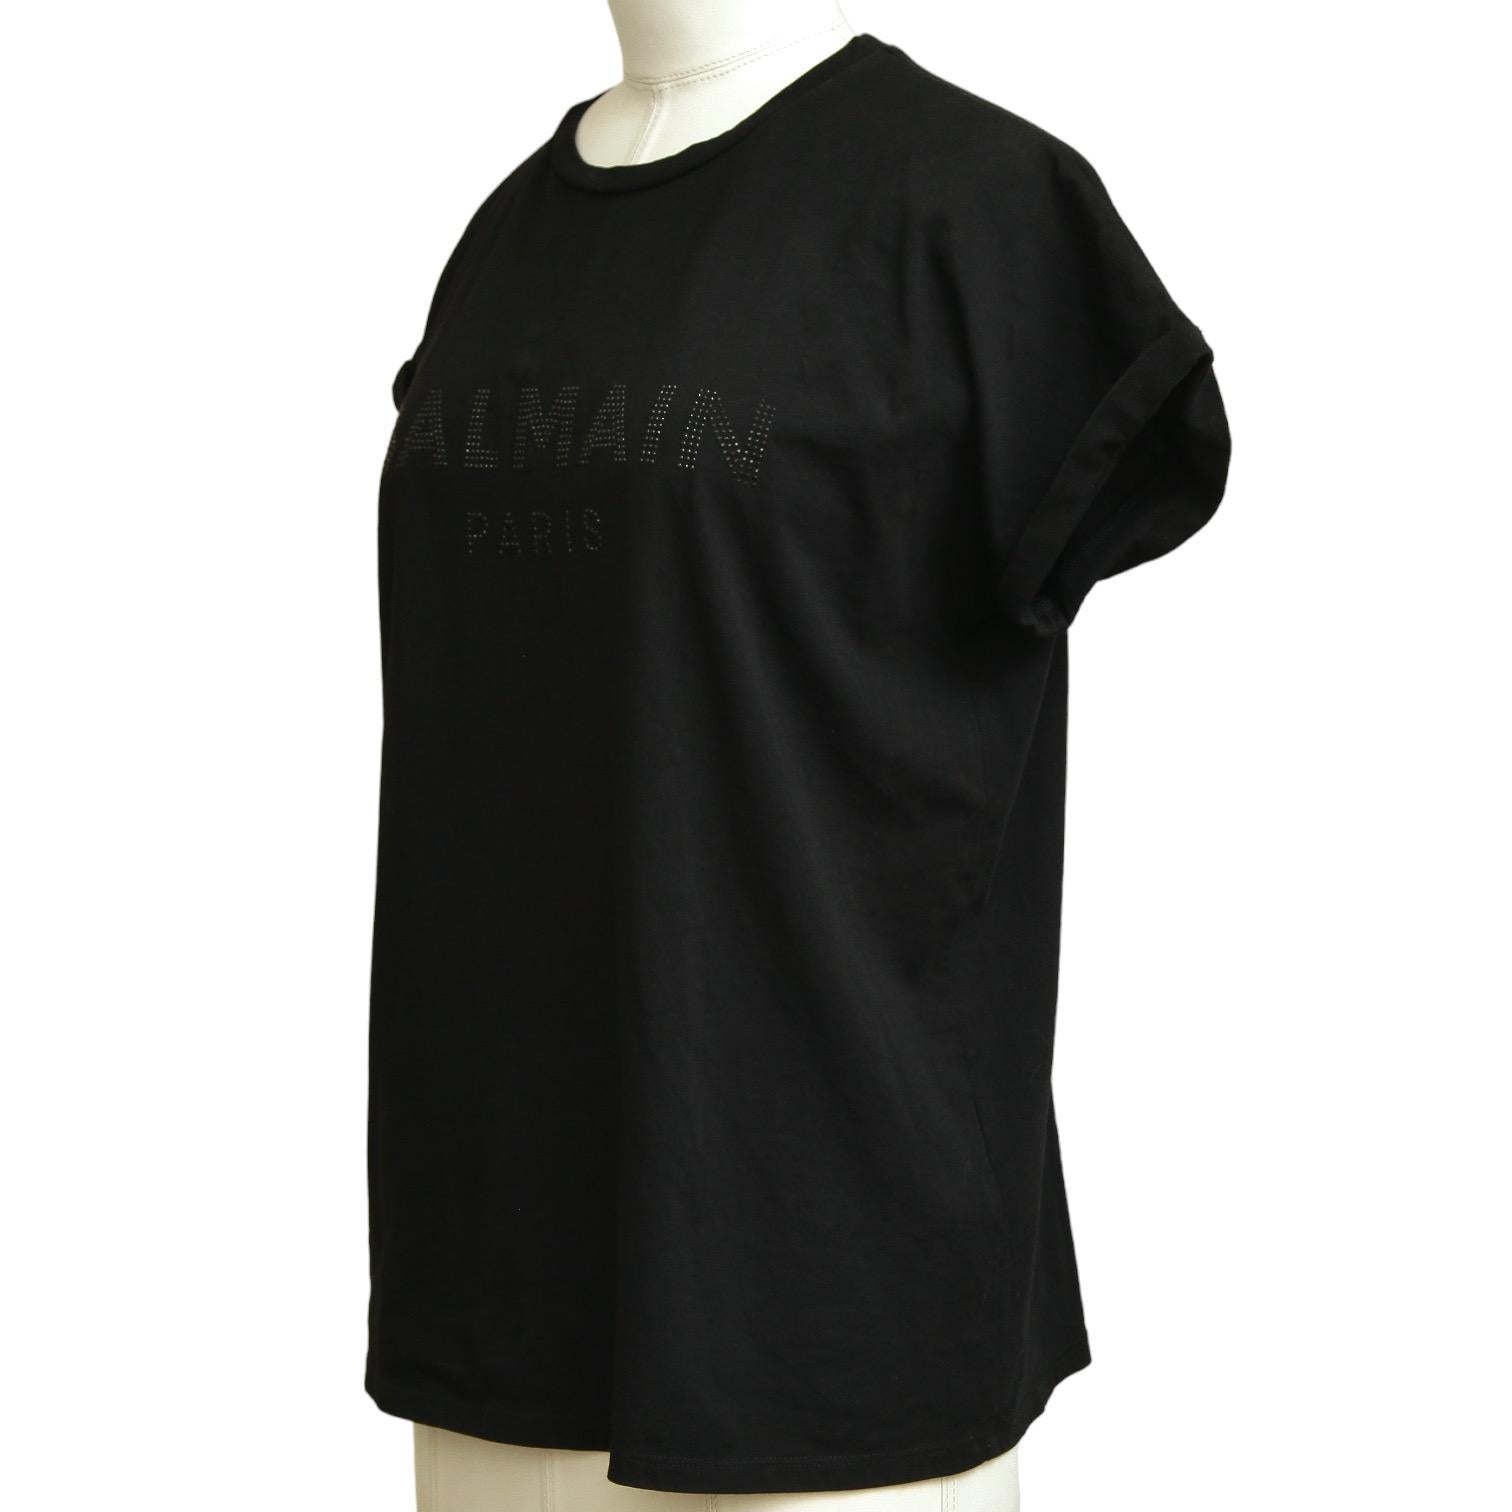 BALMAIN PARIS Black T-Shirt Top Embellishment Cap Sleeve Crew Neck Cotton XS In Good Condition For Sale In Hollywood, FL